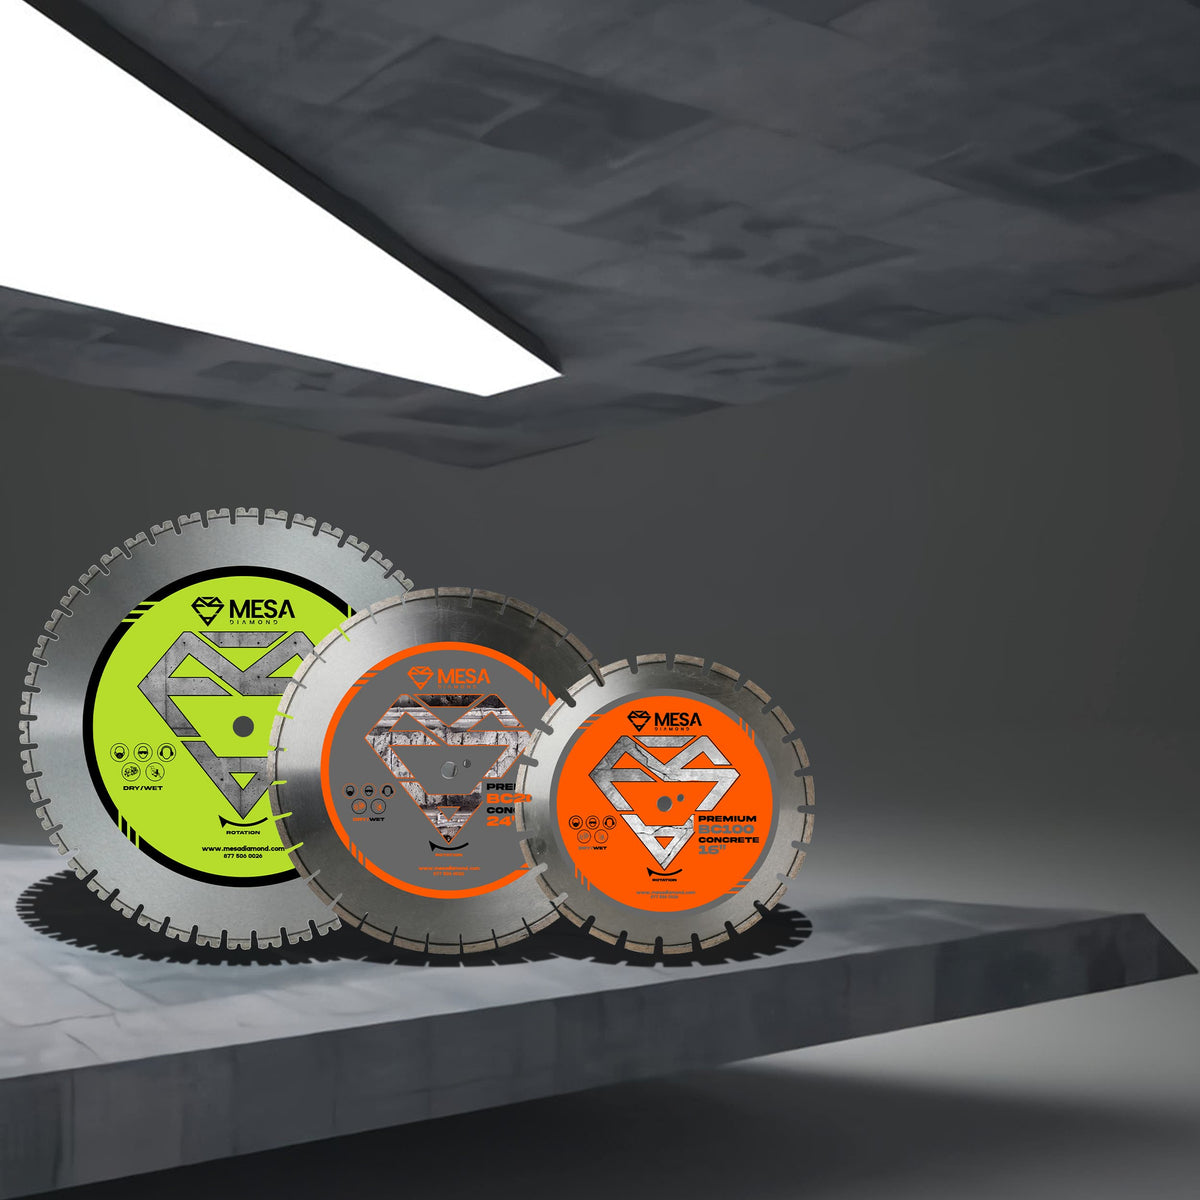 concrete diamond saw blade, asphalt diamond saw blade, w segmented concrete saw blade and bevel saw blade are in the picture. They are used for concrete, asphalt, marble, granite cutting applications